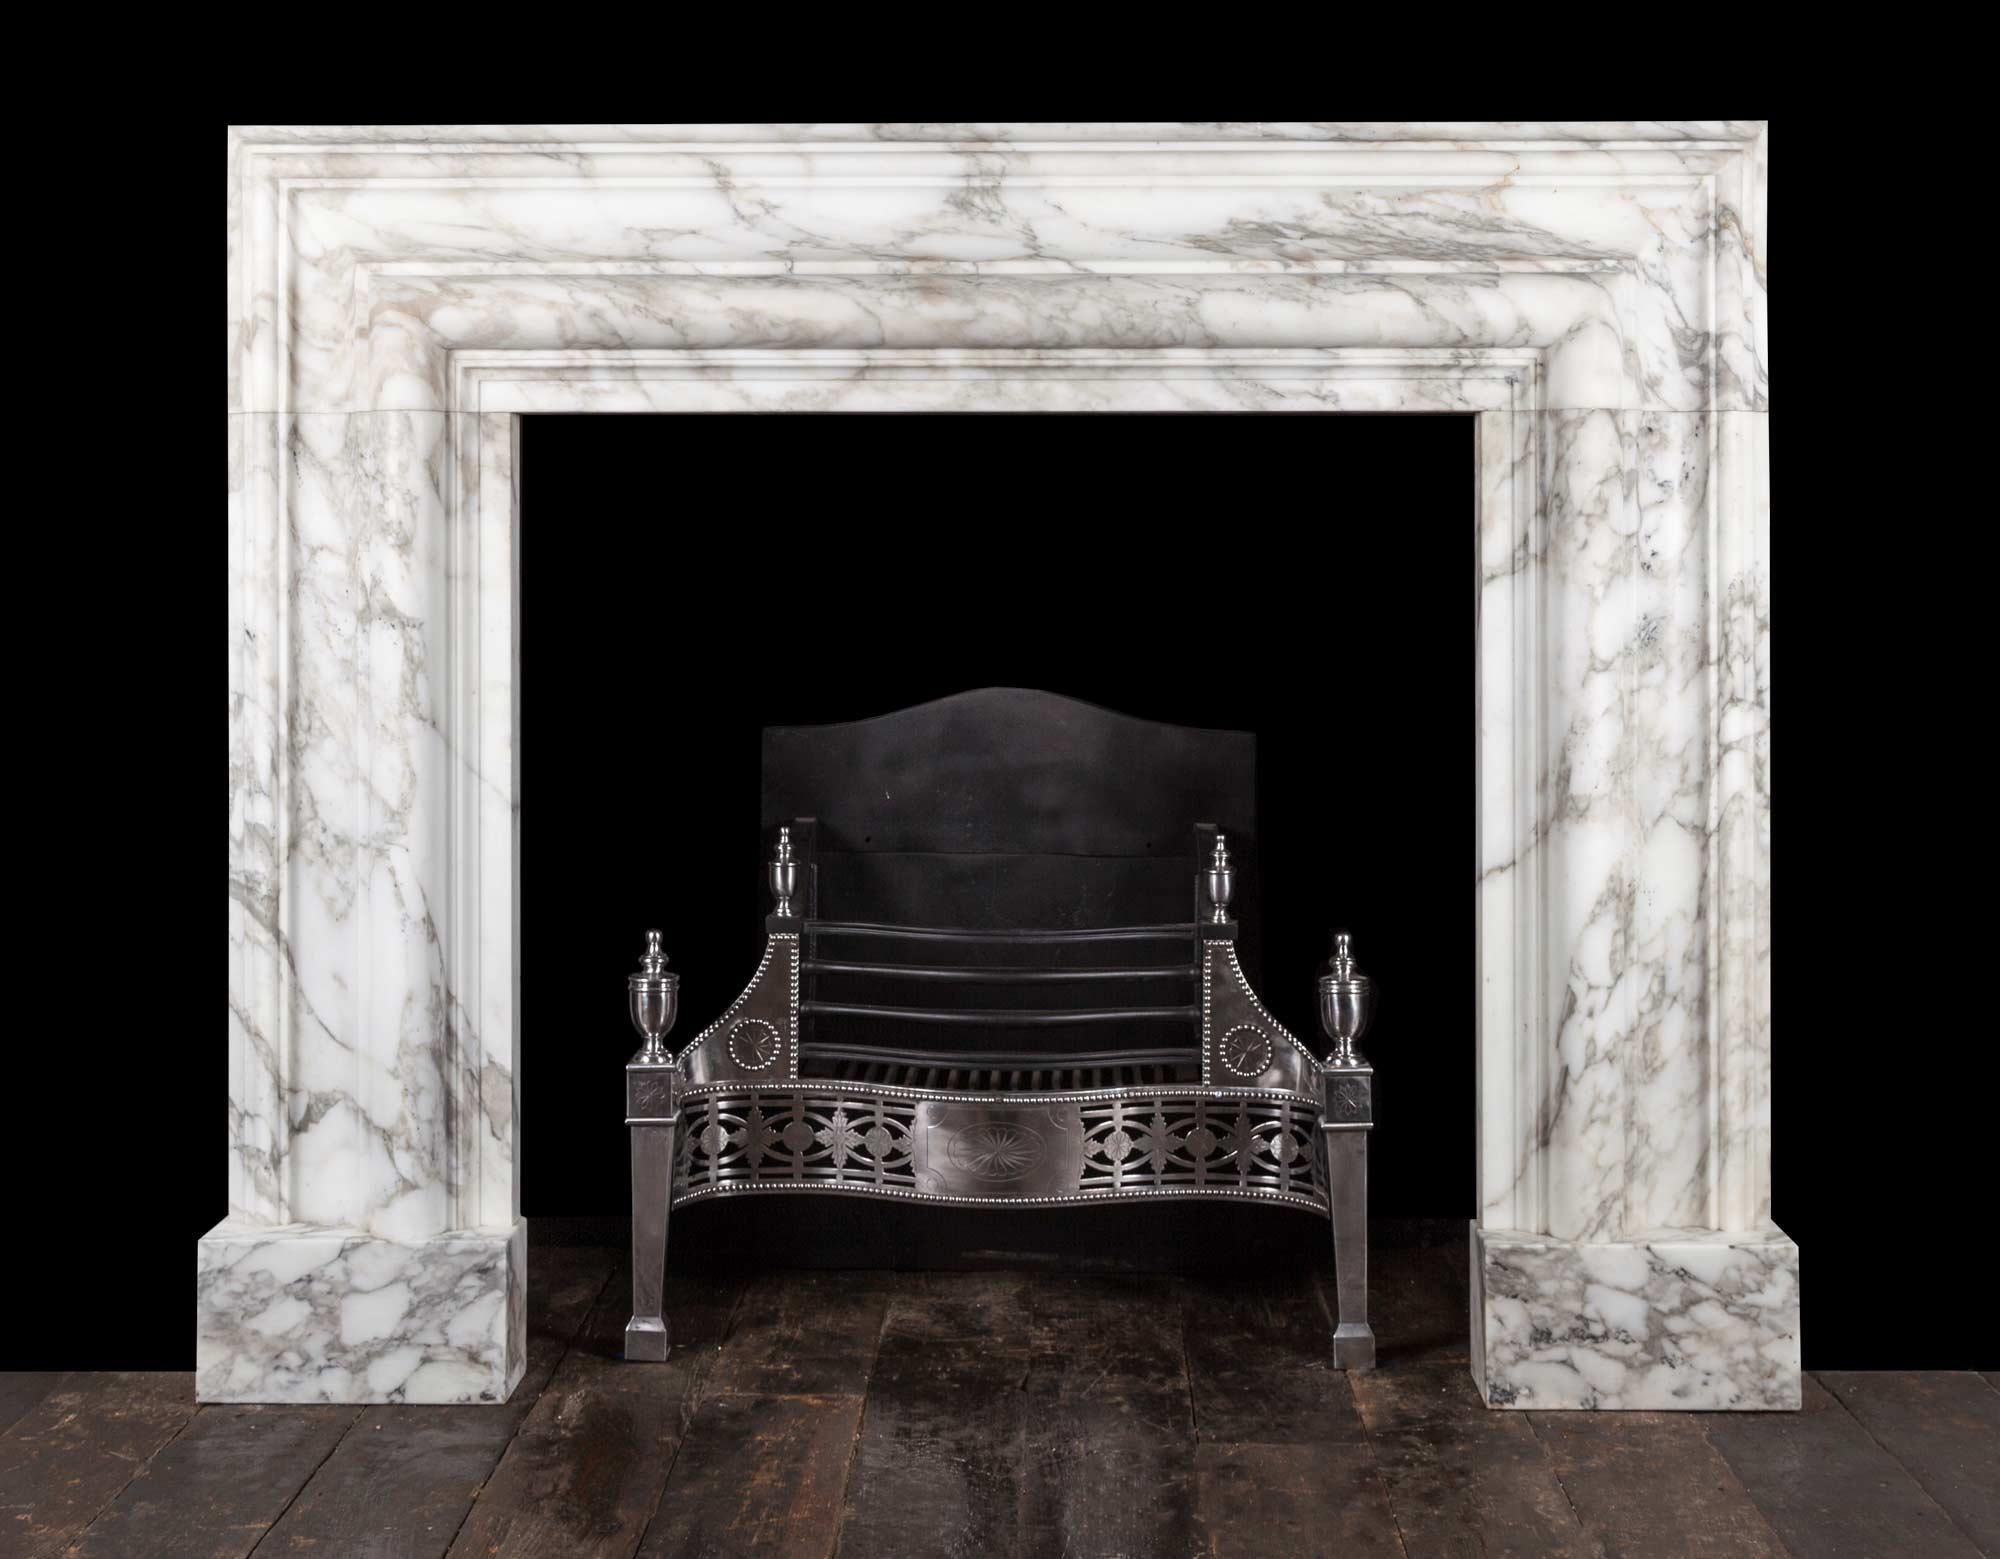 A large bolection fireplace surround of generous proportions 
The substantial 12? (300mm) wide bolection moulded frame, rests on plain square plinths.
Carved from a block of beautifully figured, Arabscato Carrara marble, hand selected in Italy by